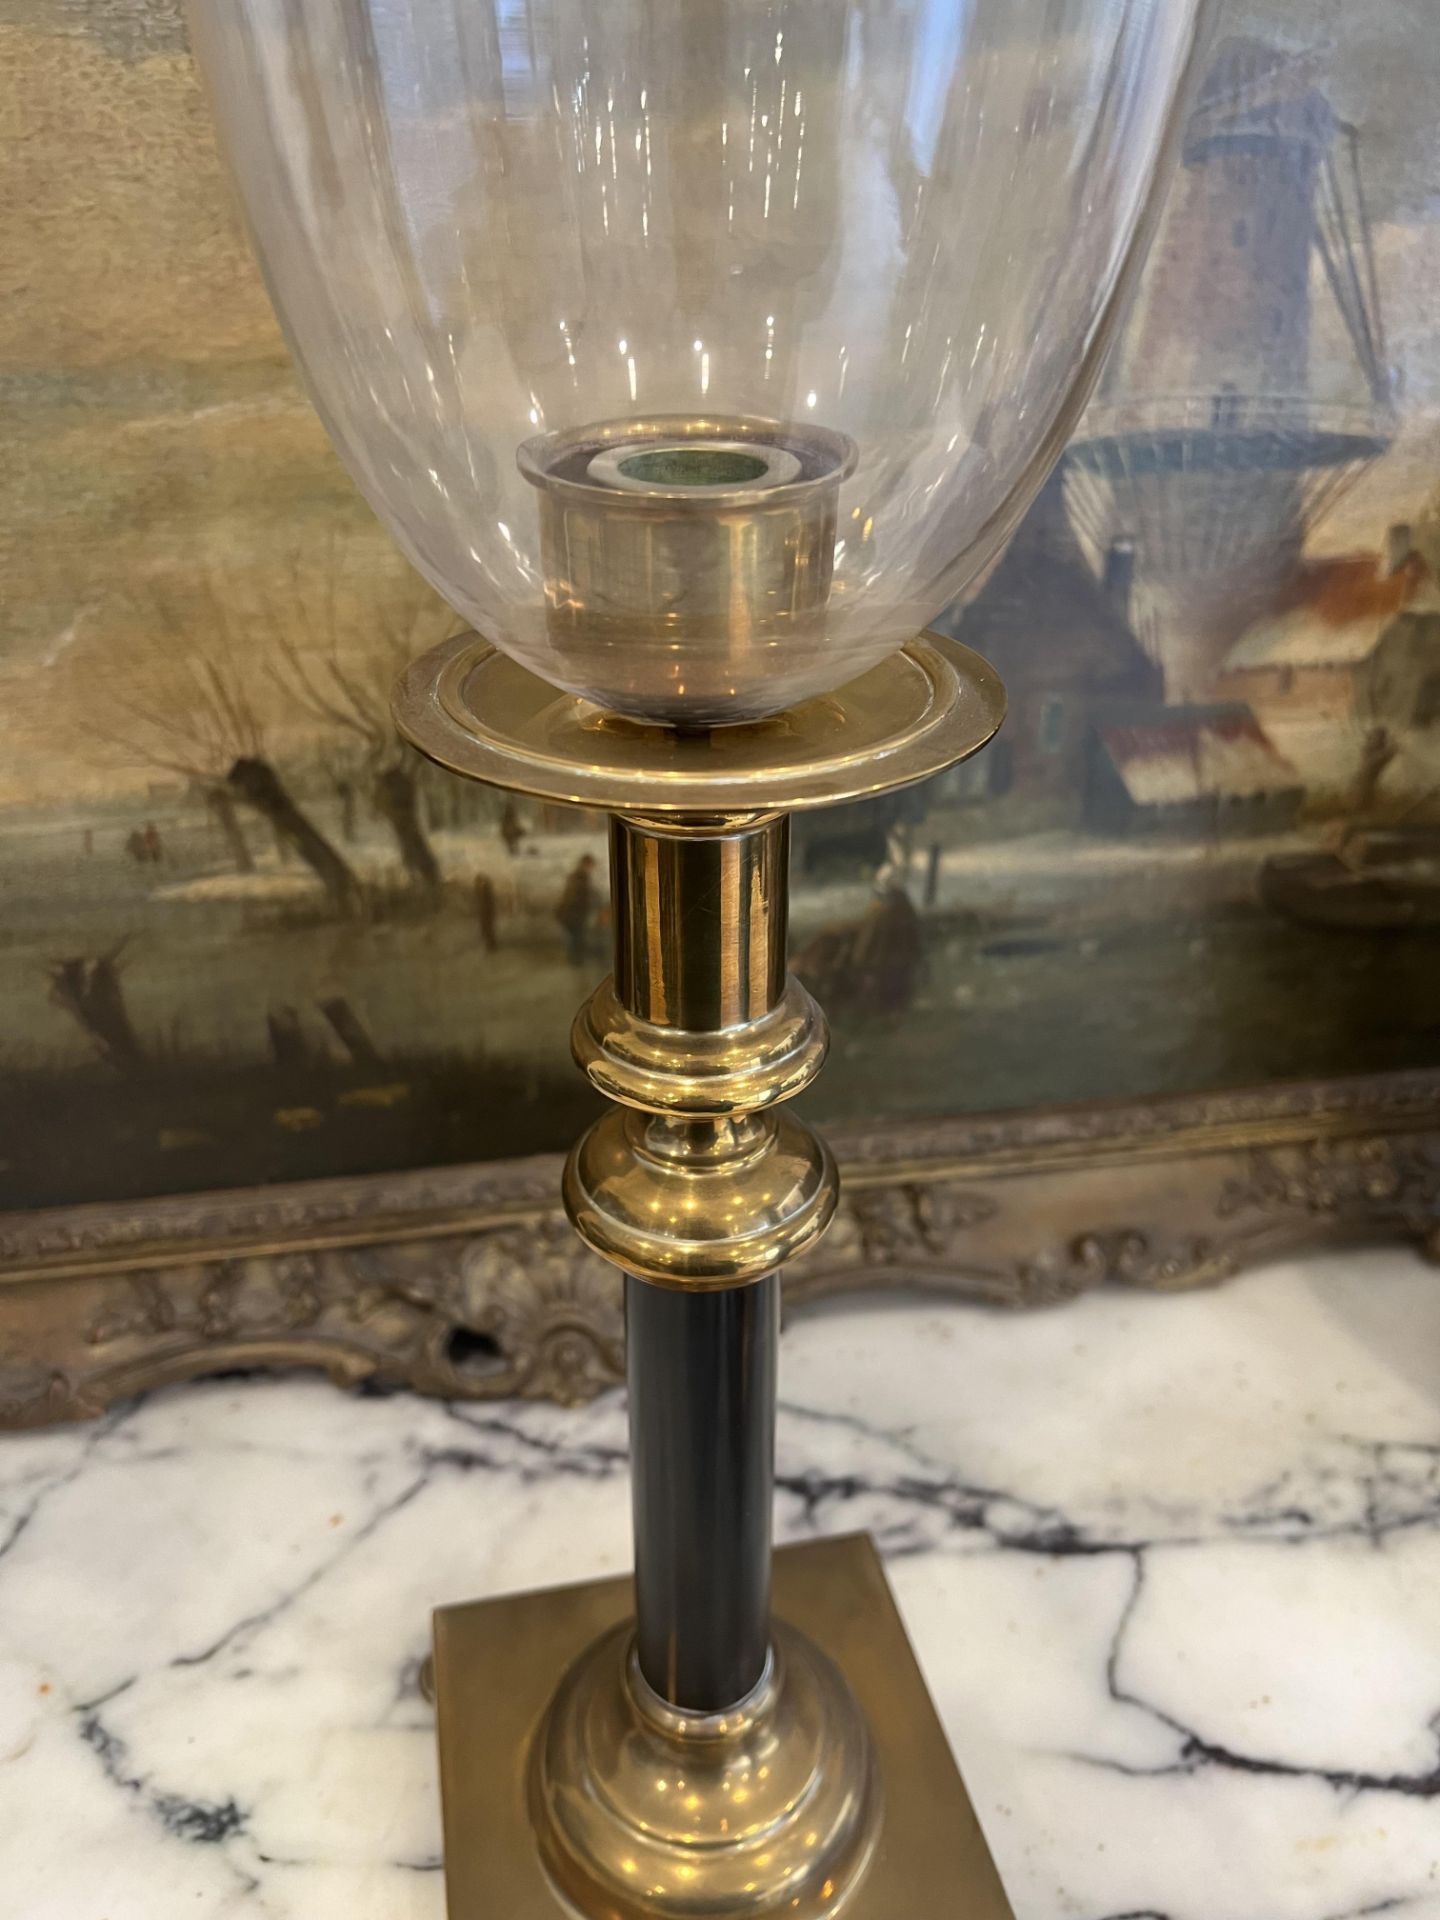 A PAIR OF REGENCY STYLE BRASS HURRICANE LAMPS - Image 4 of 4